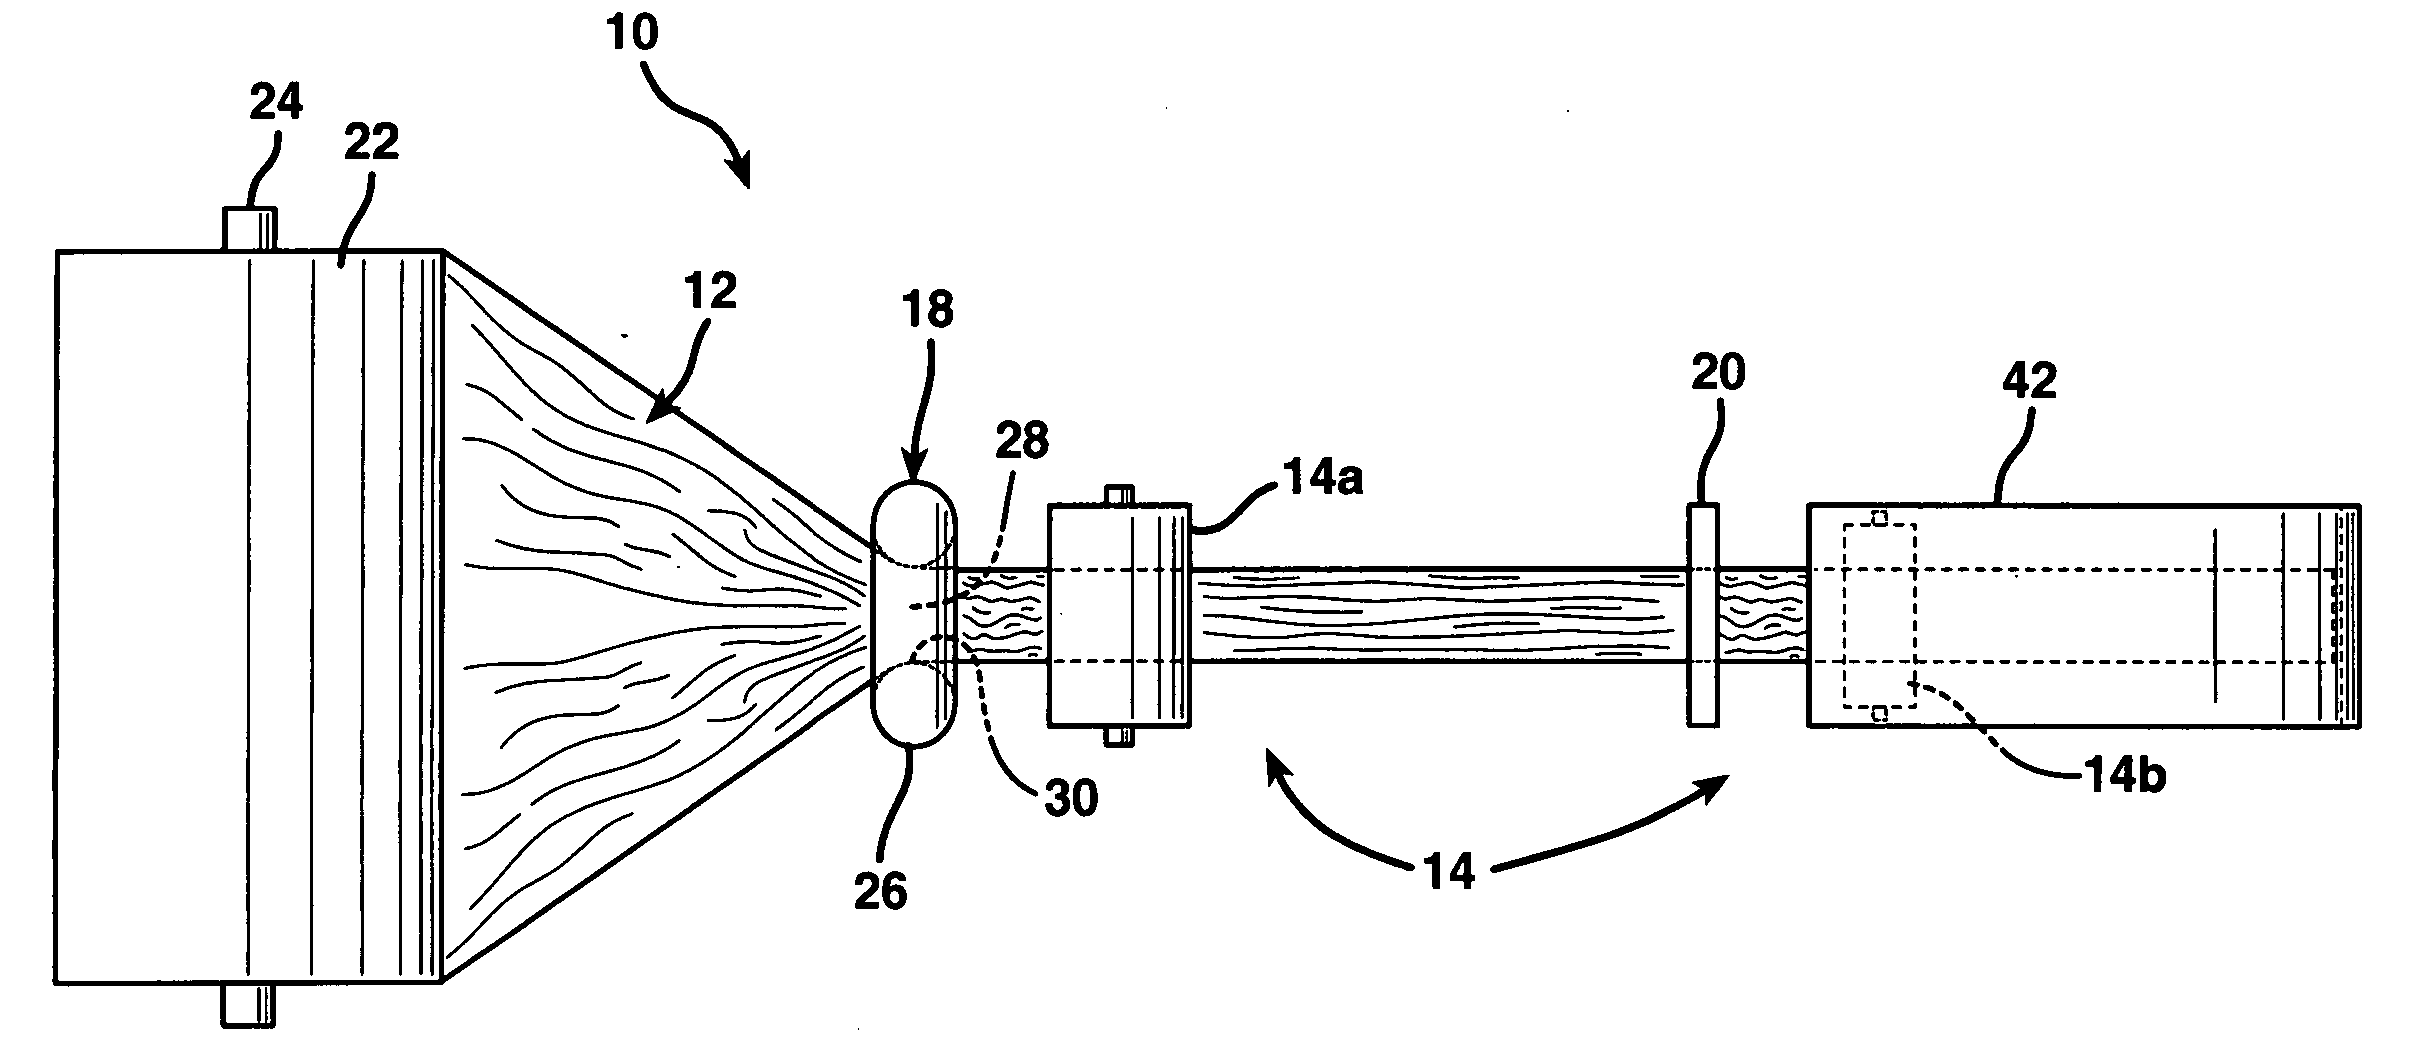 Machine and method for converting a web of material into dunnage